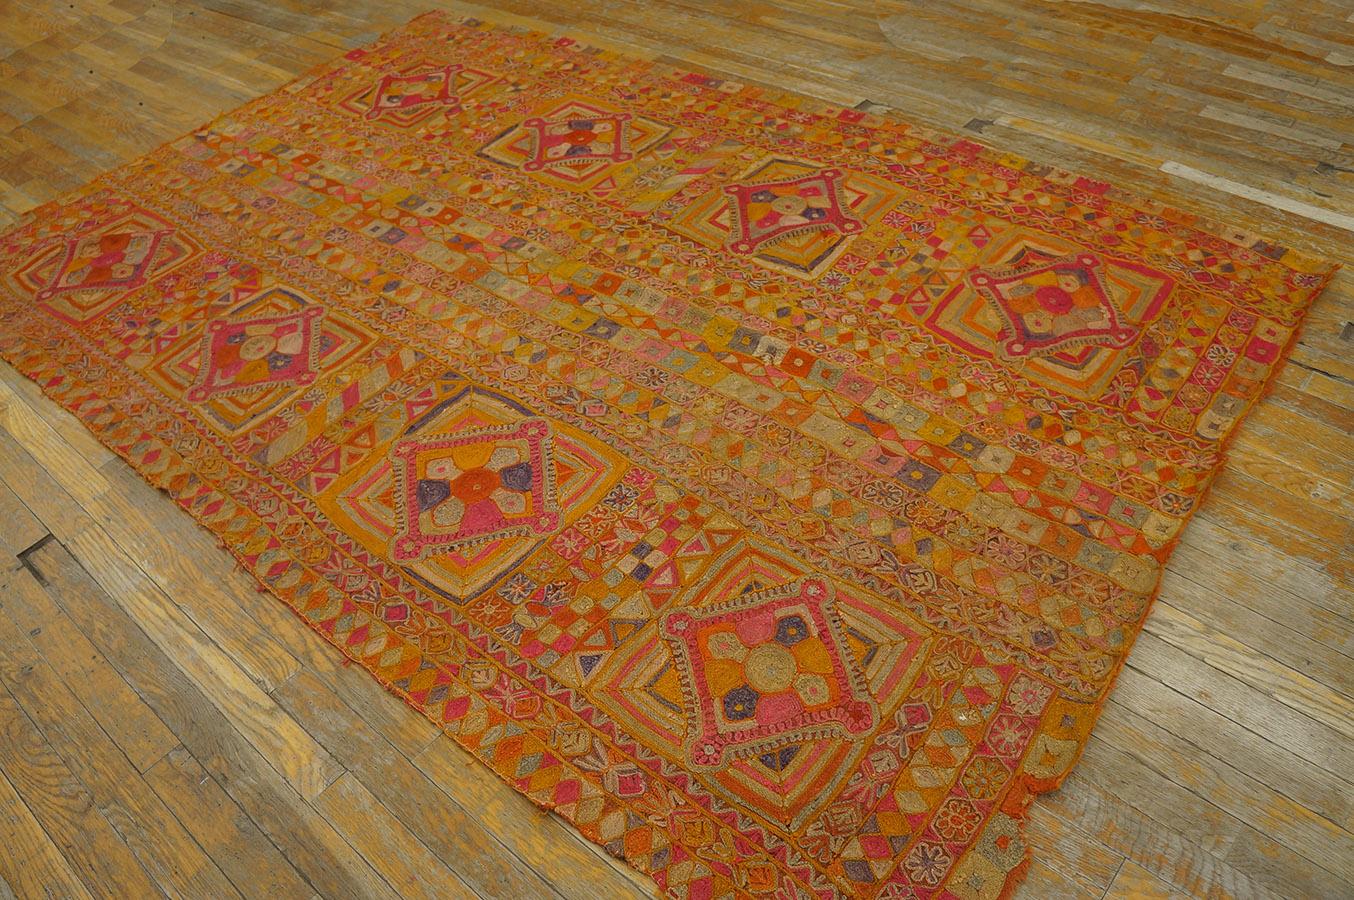 1970s Marsh Arab Embroidery ( 5' 3'' x 8' - 160 x 245 cm )
From The Marsh Arabs (Ma’dan) of Beni Hassan villages of Southern Iraq
